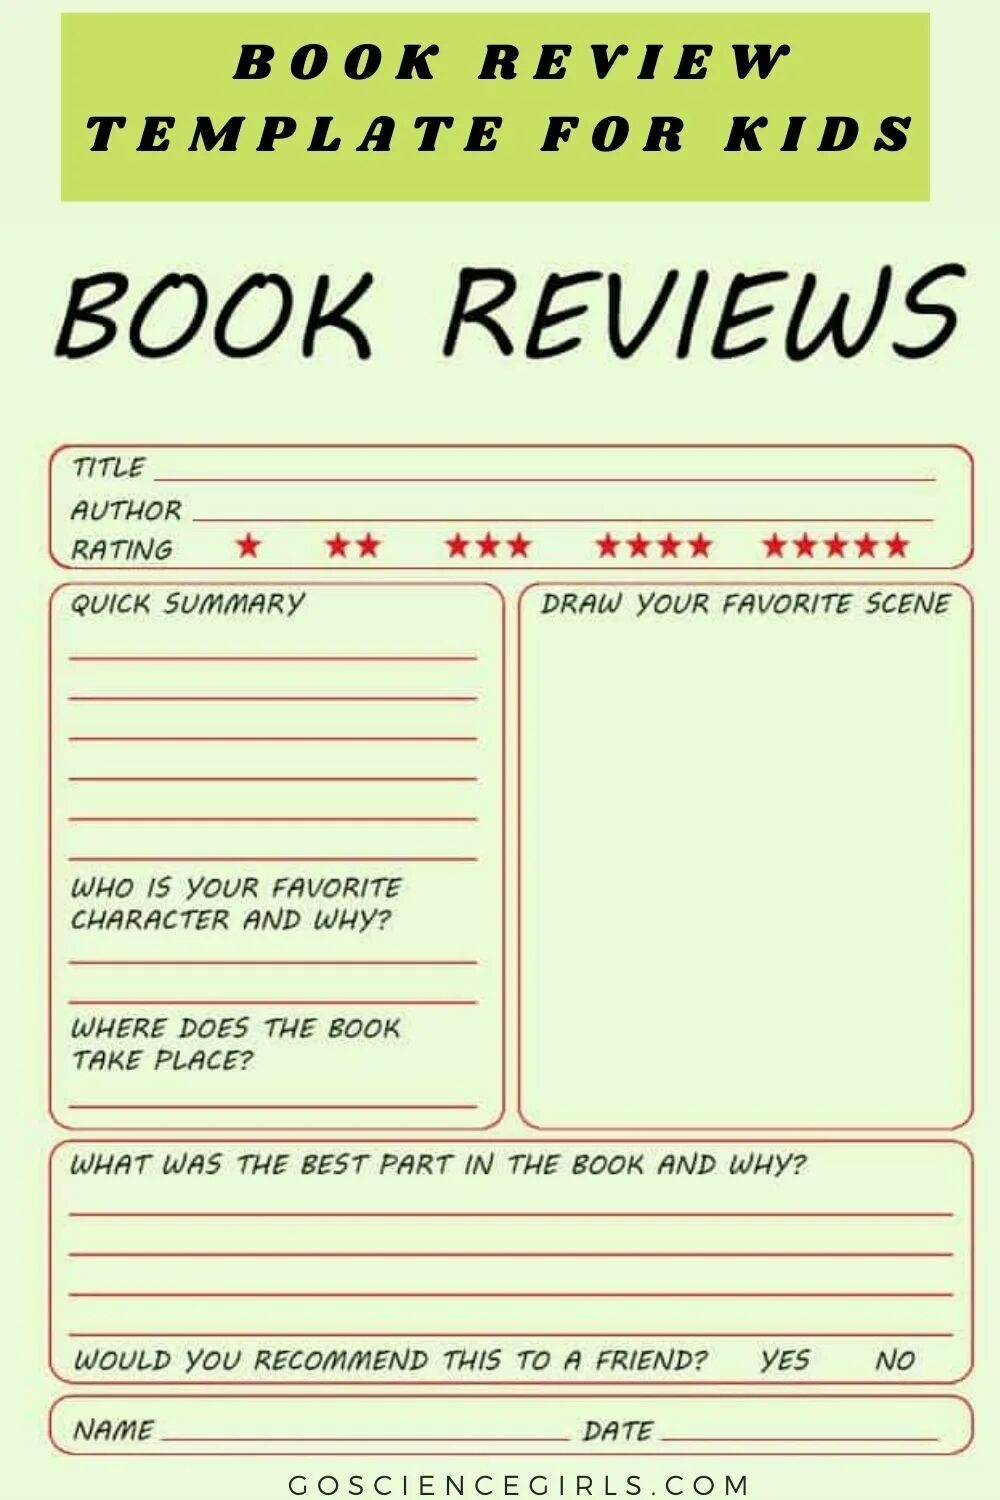 Book Review план. Book Review шаблон. How to write a book Review. Writing a book Review примеры. Did he write a book